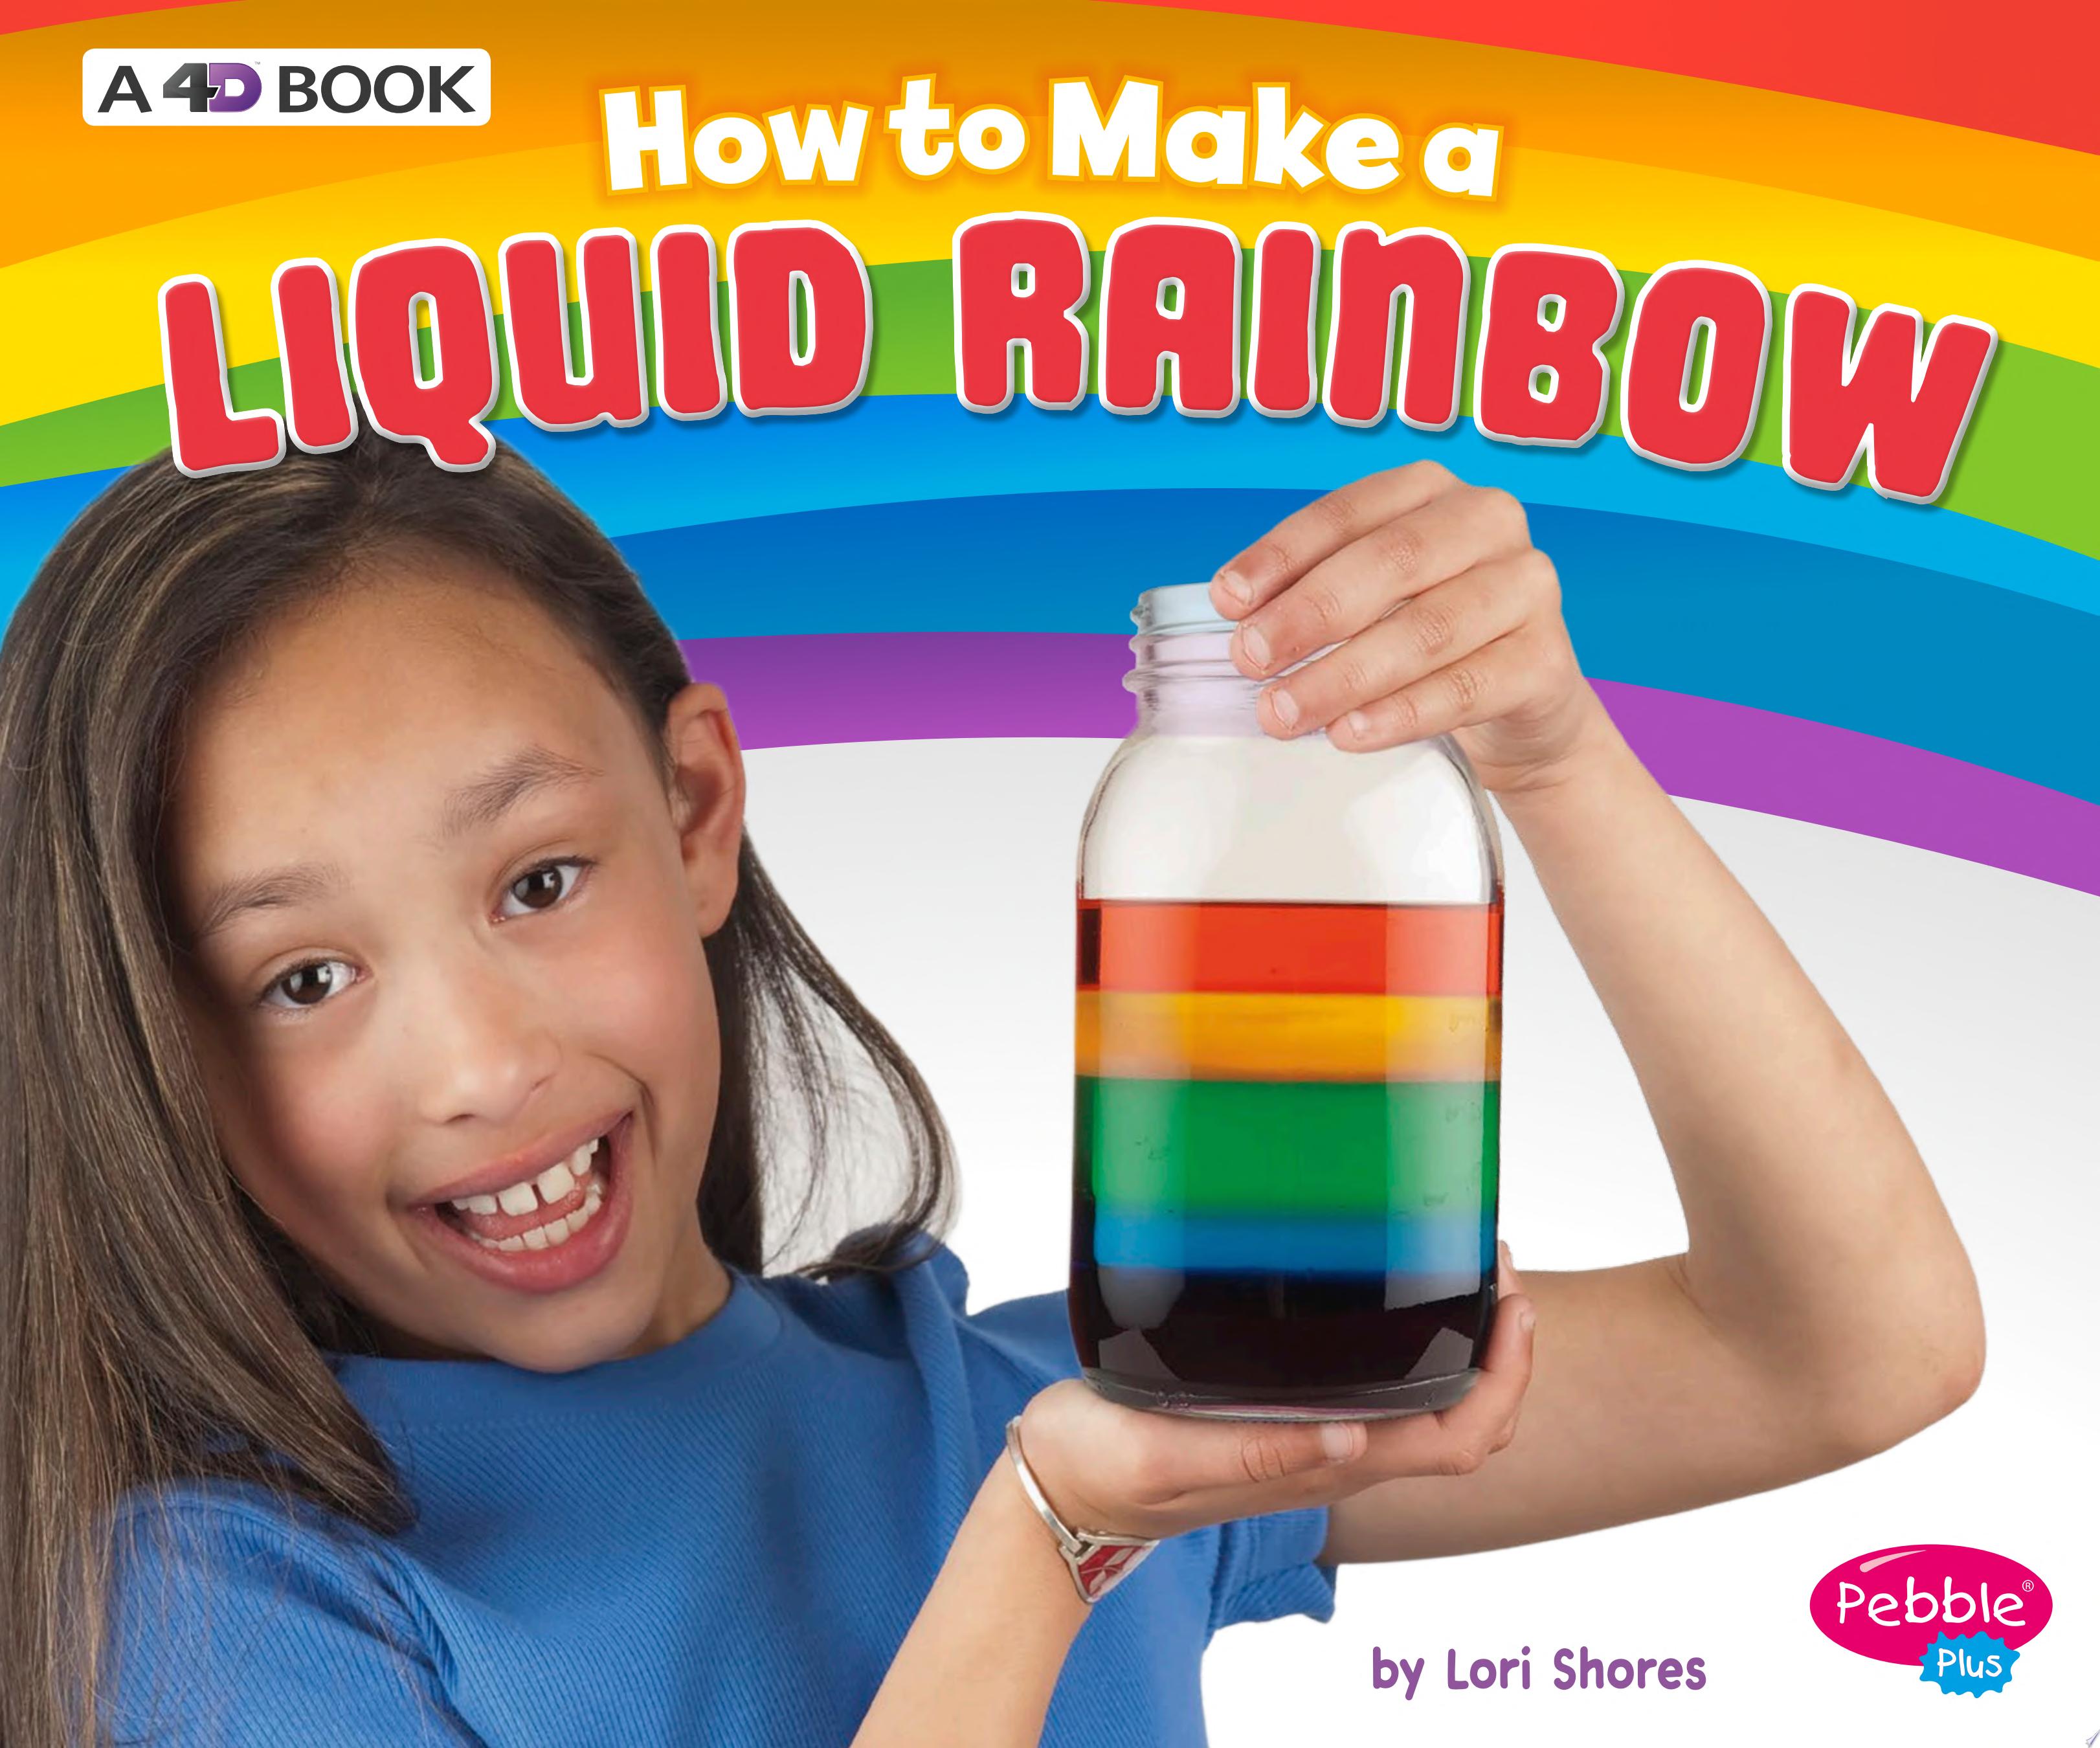 Image for "How to Make a Liquid Rainbow"